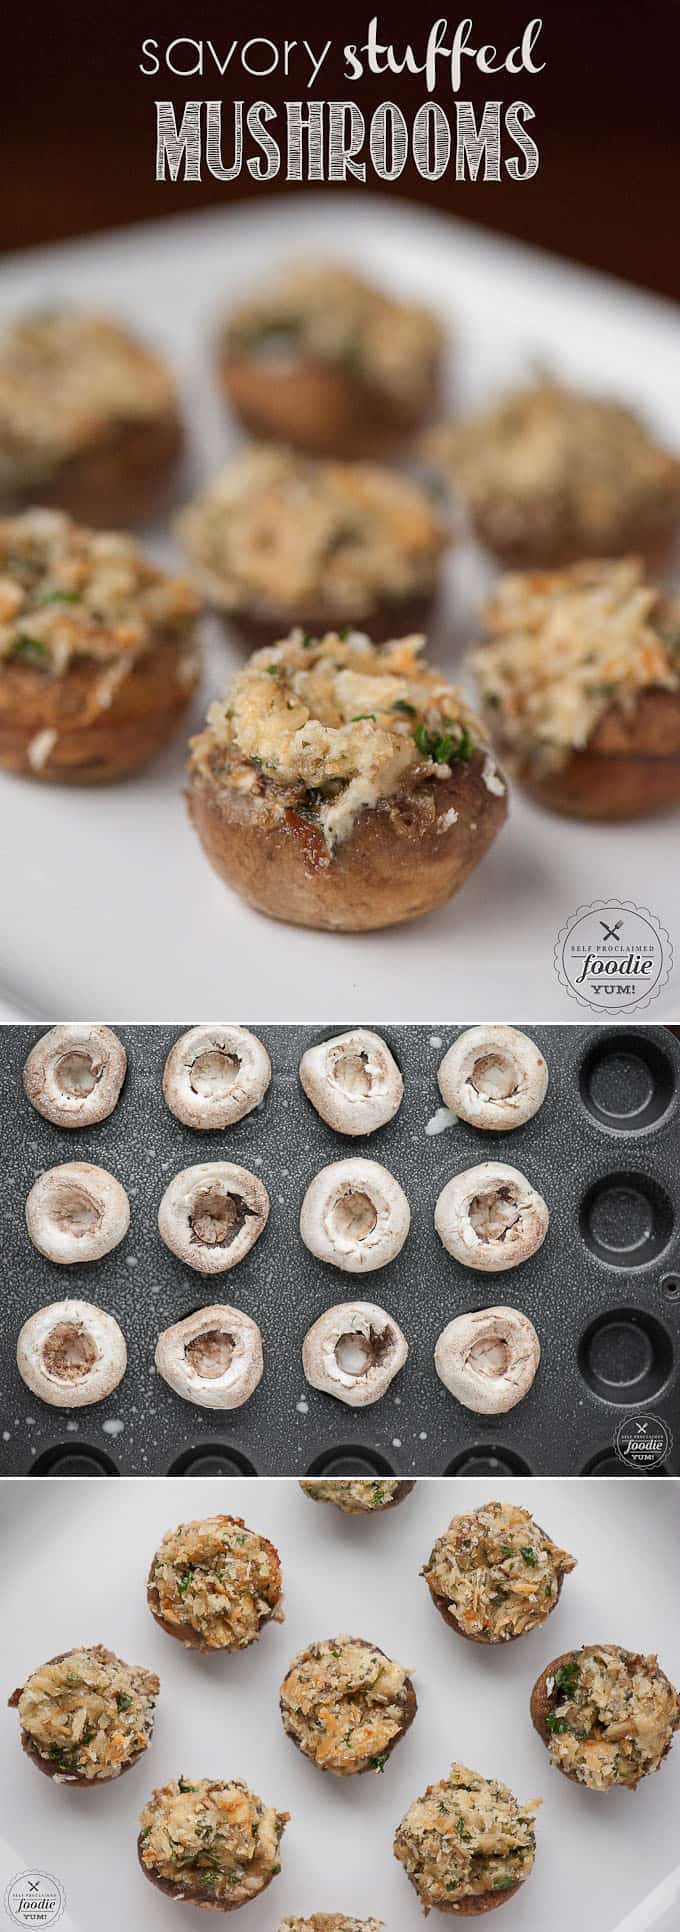 Savory Stuffed Mushrooms, filled with a warm flavorful garlic and cheese mixture, are bite sized appetizers that will please everyone at your dinner party.